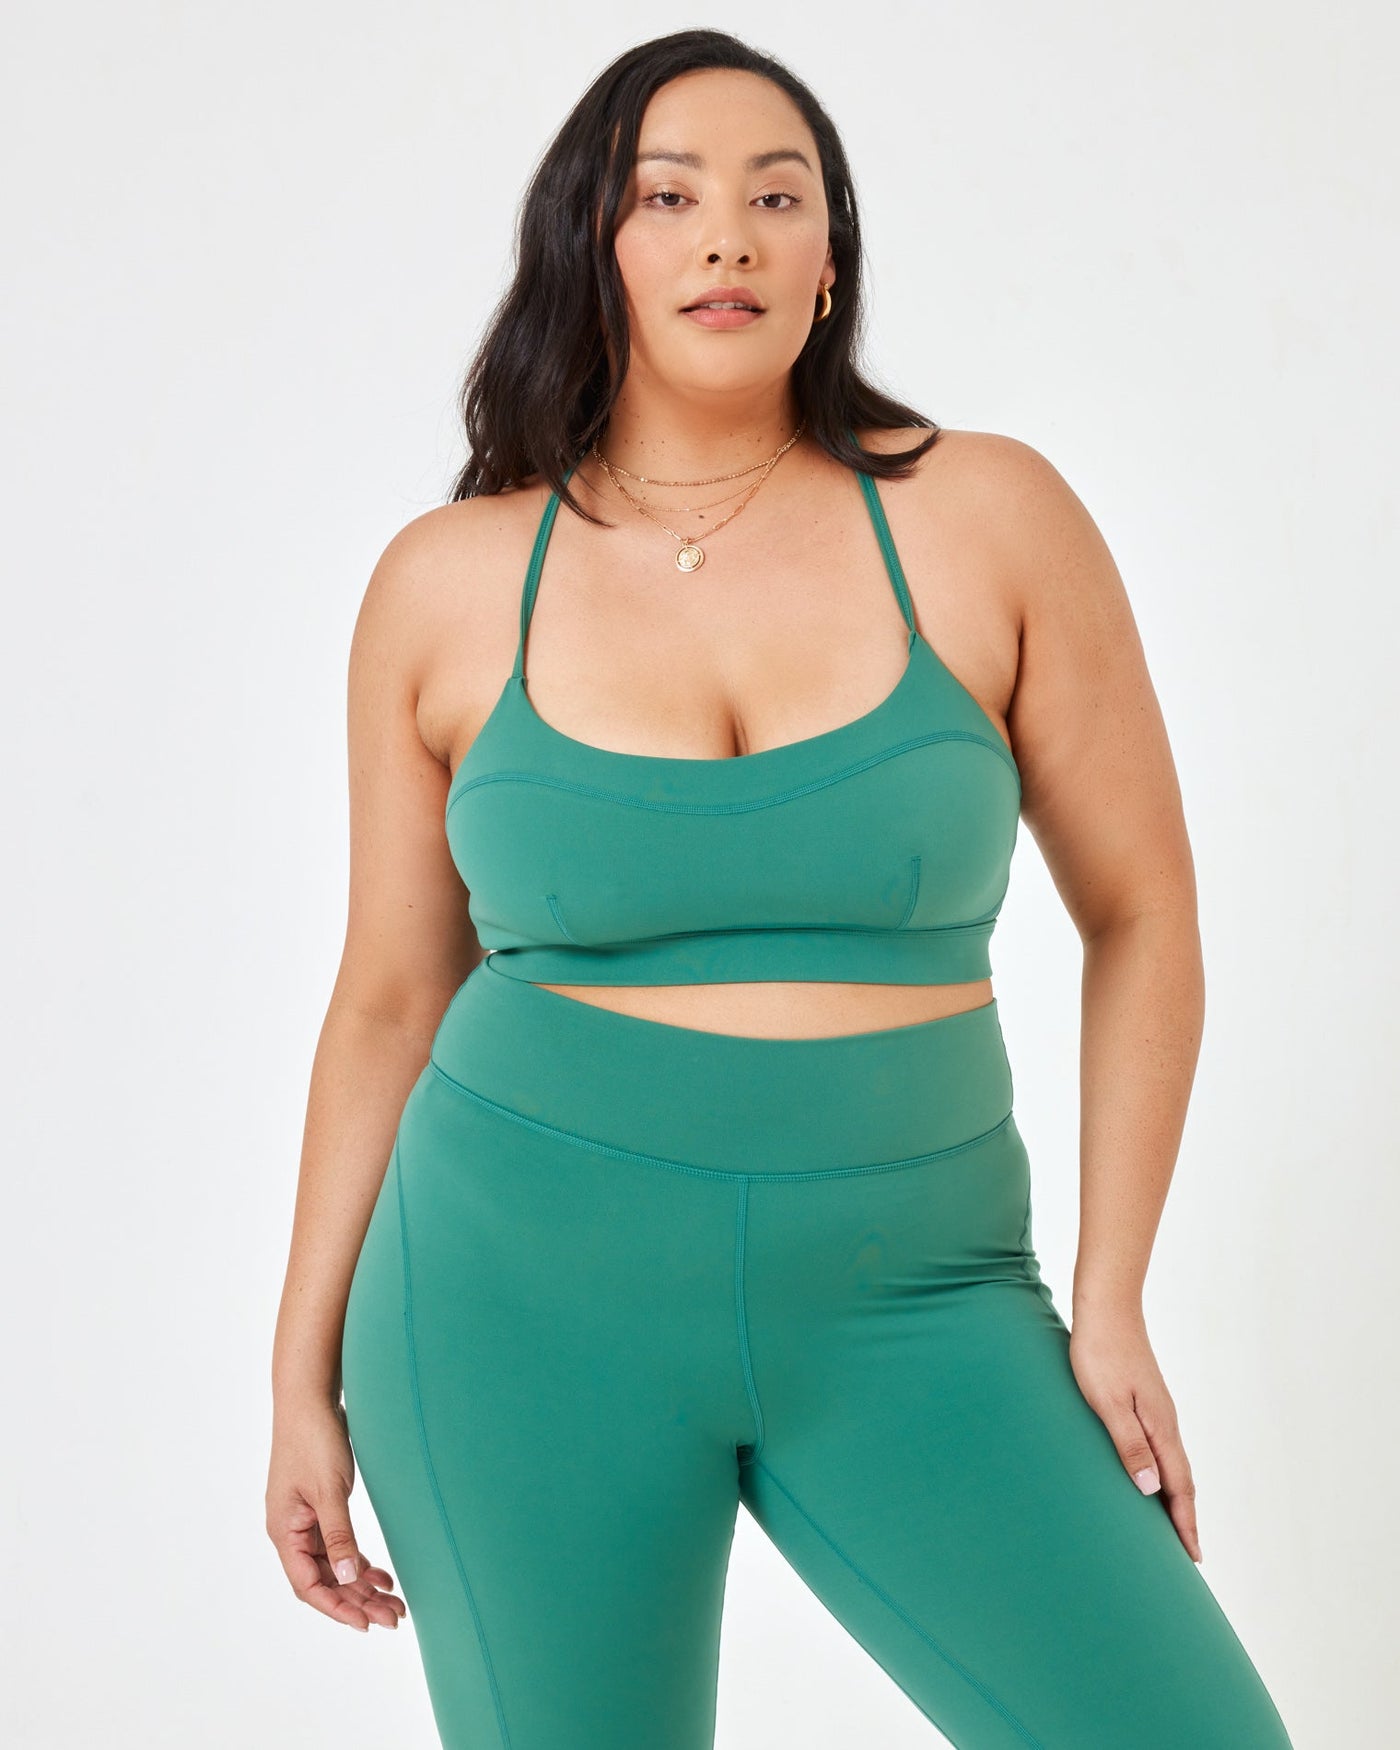 LSPACE Time Out Bra - Cypress